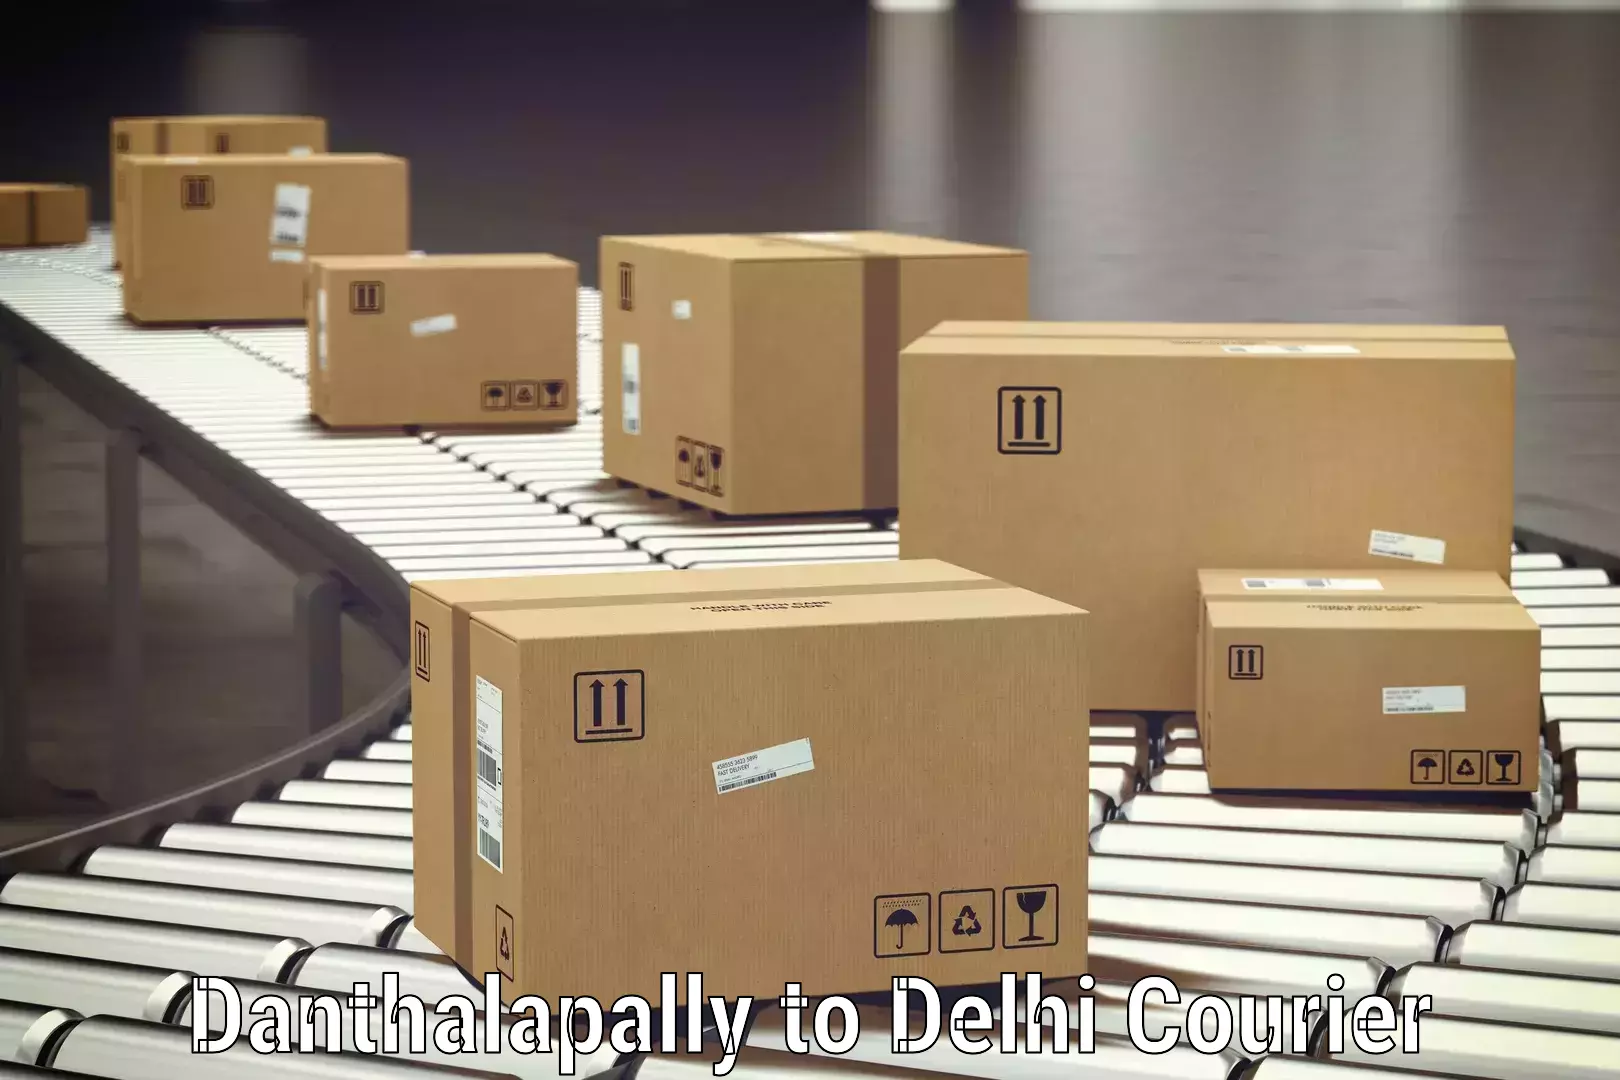 Baggage shipping advice Danthalapally to Delhi